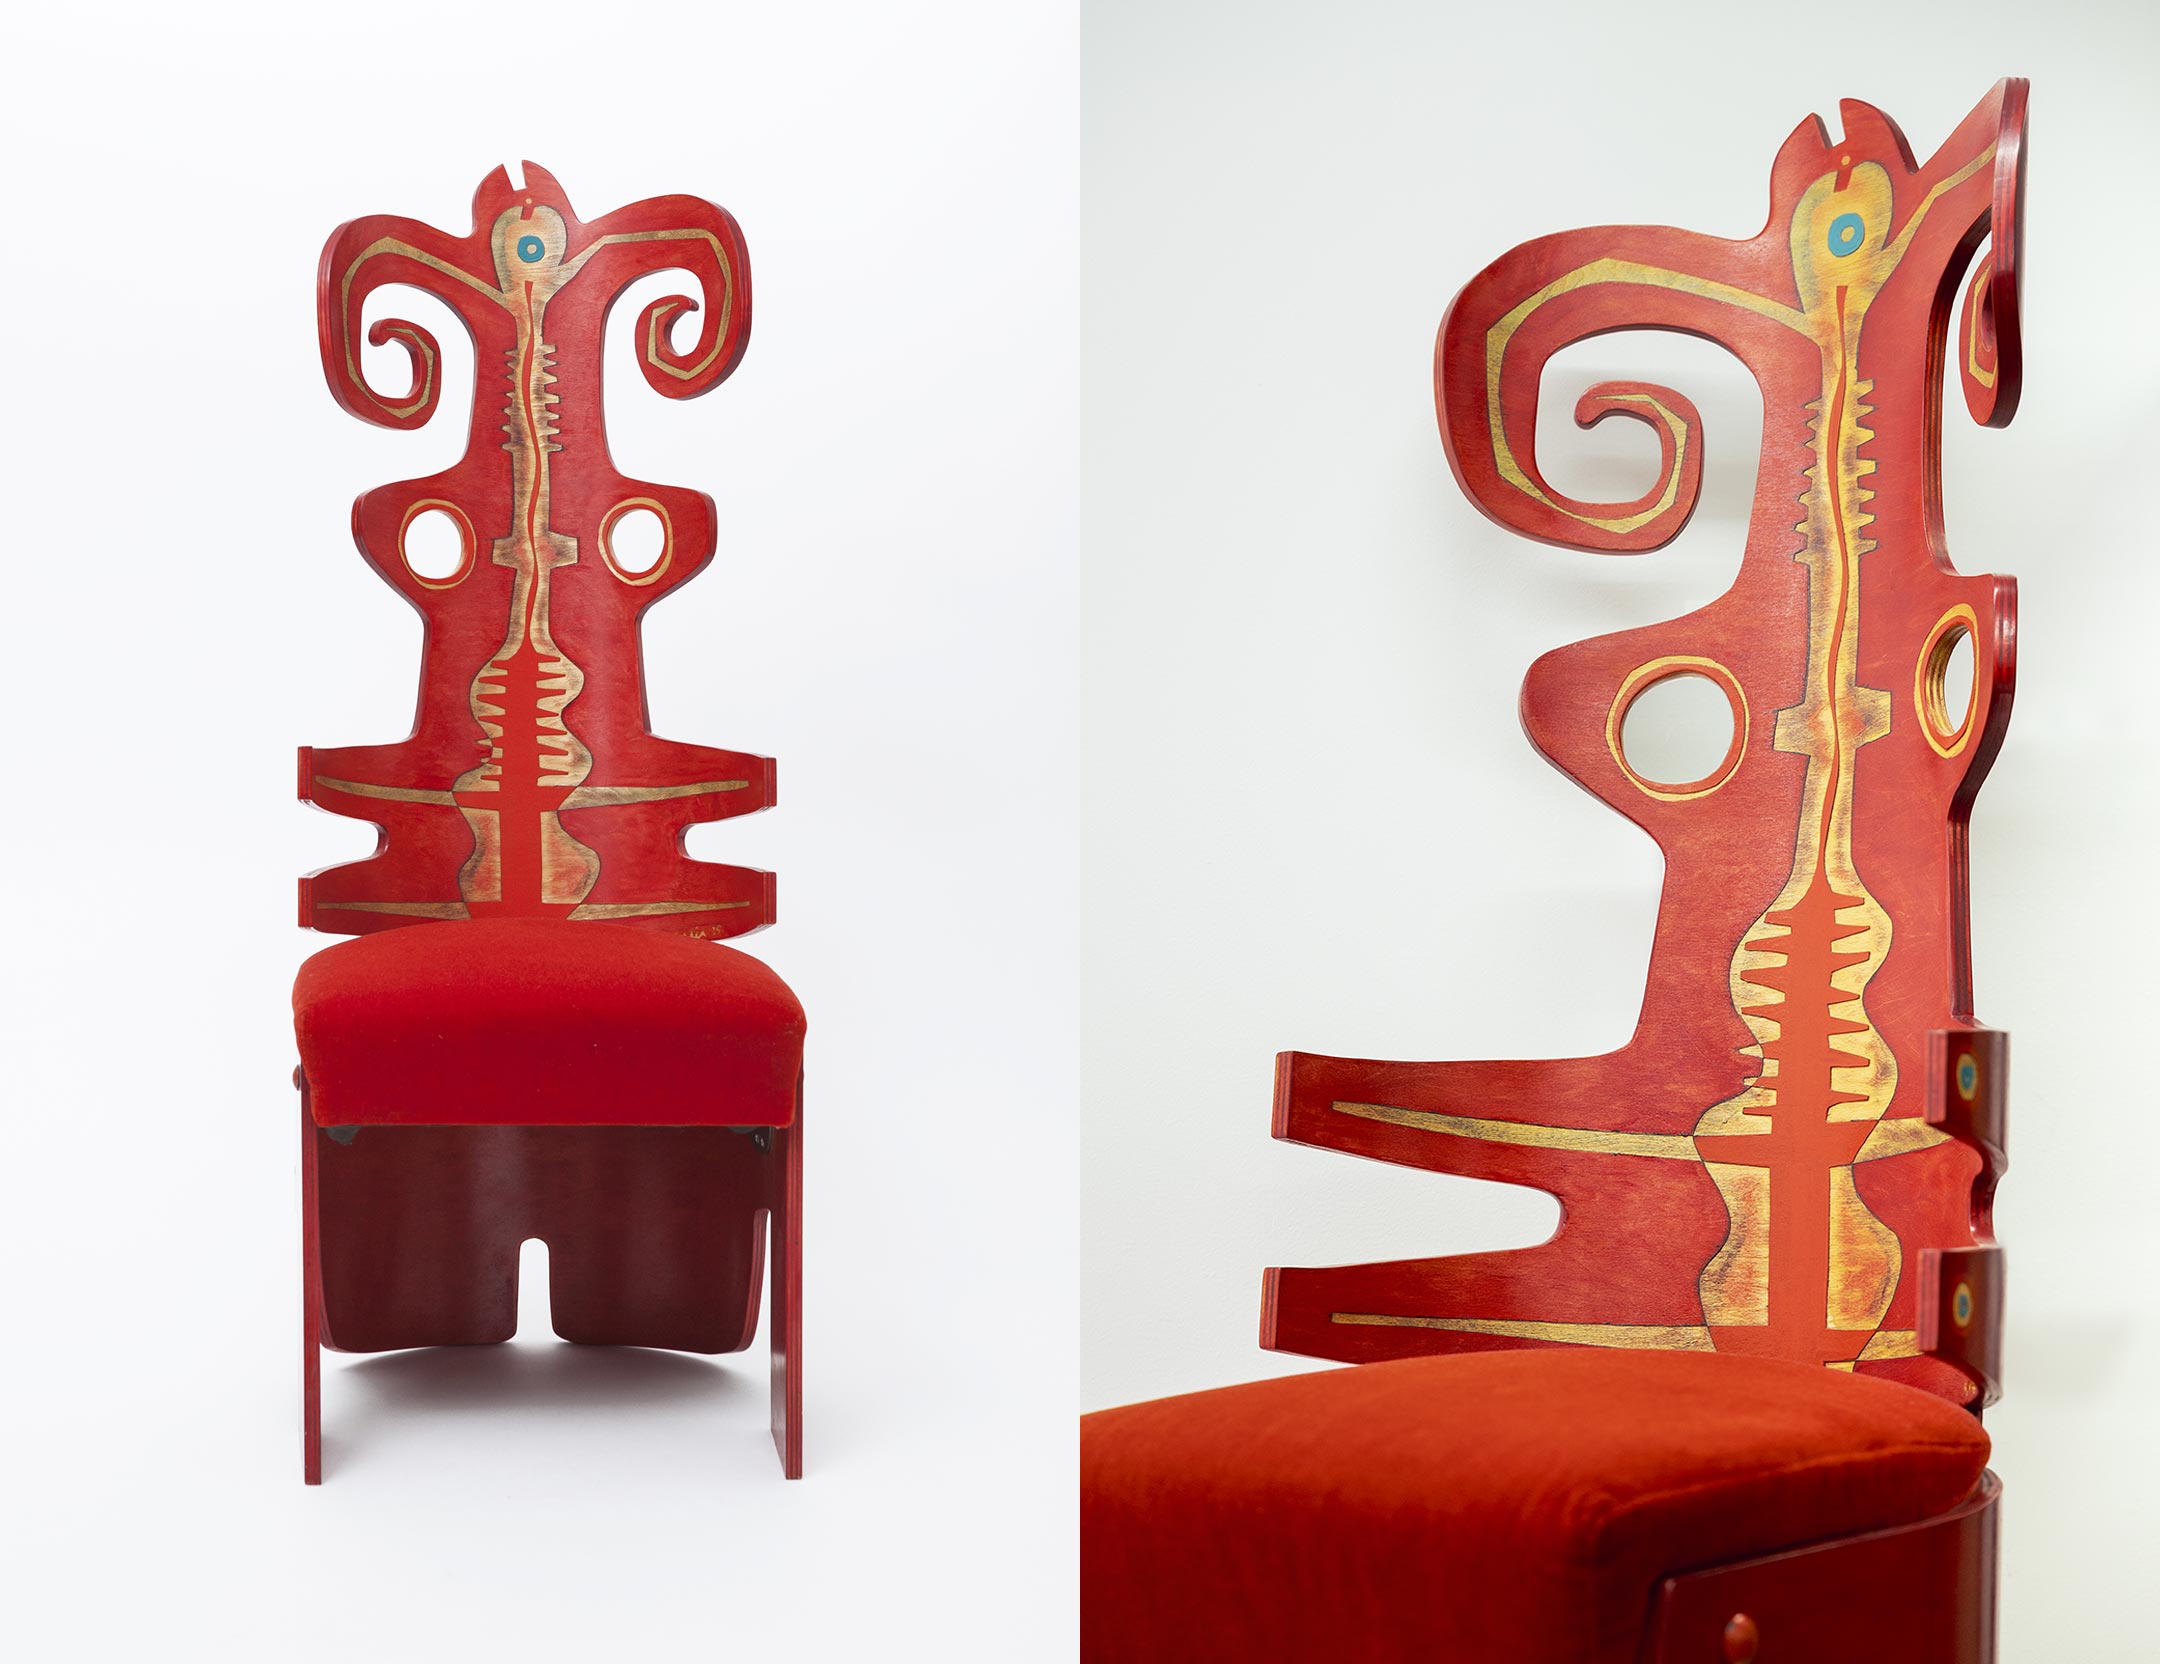 The Red Twiddler chair by Terence Main